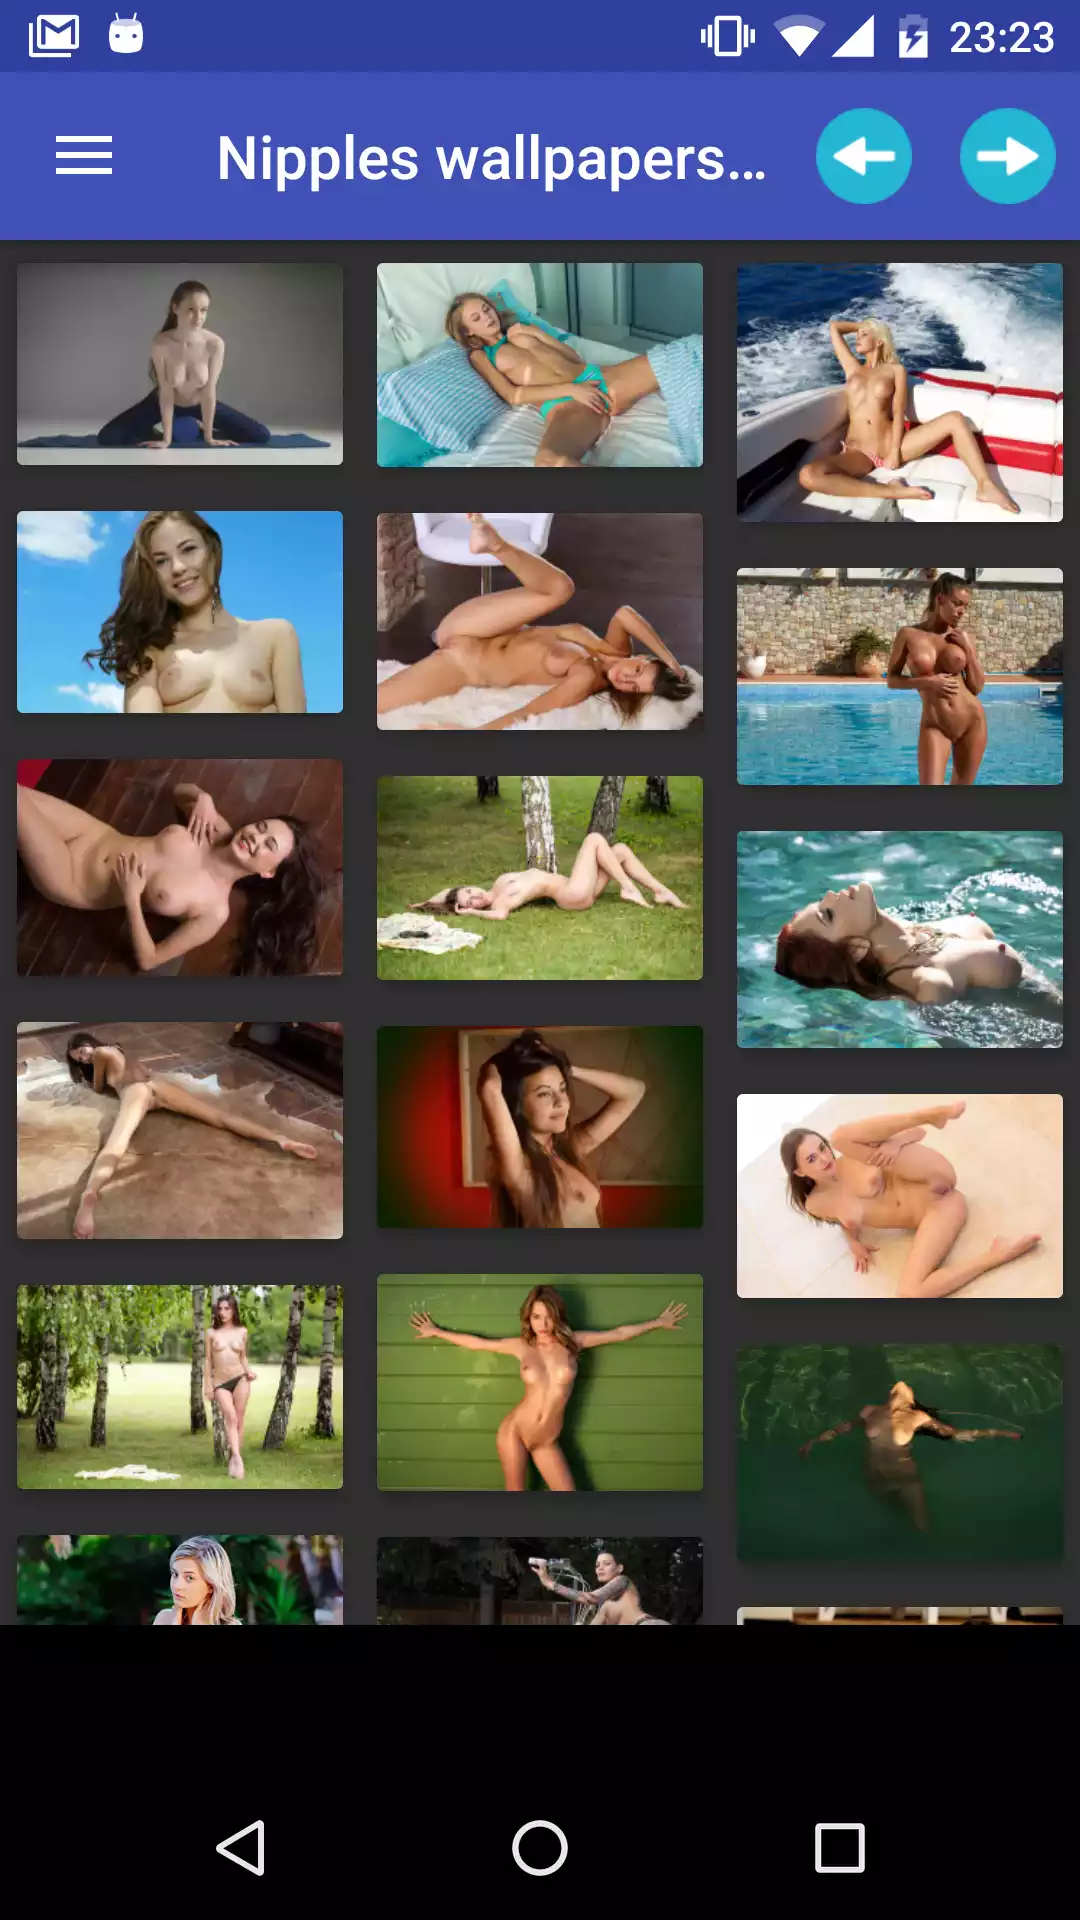 Sexy nipples wallpapers pornstars,android,apk,market,and,tits,wallpapers,hentsi,panties,nhentai,collection,mythras,amateur,hentai,nipples,photo,lair,cuckhold,puzzle,download,appa,shemales,photos,perfect,adult,apps,erotic,sexy,app